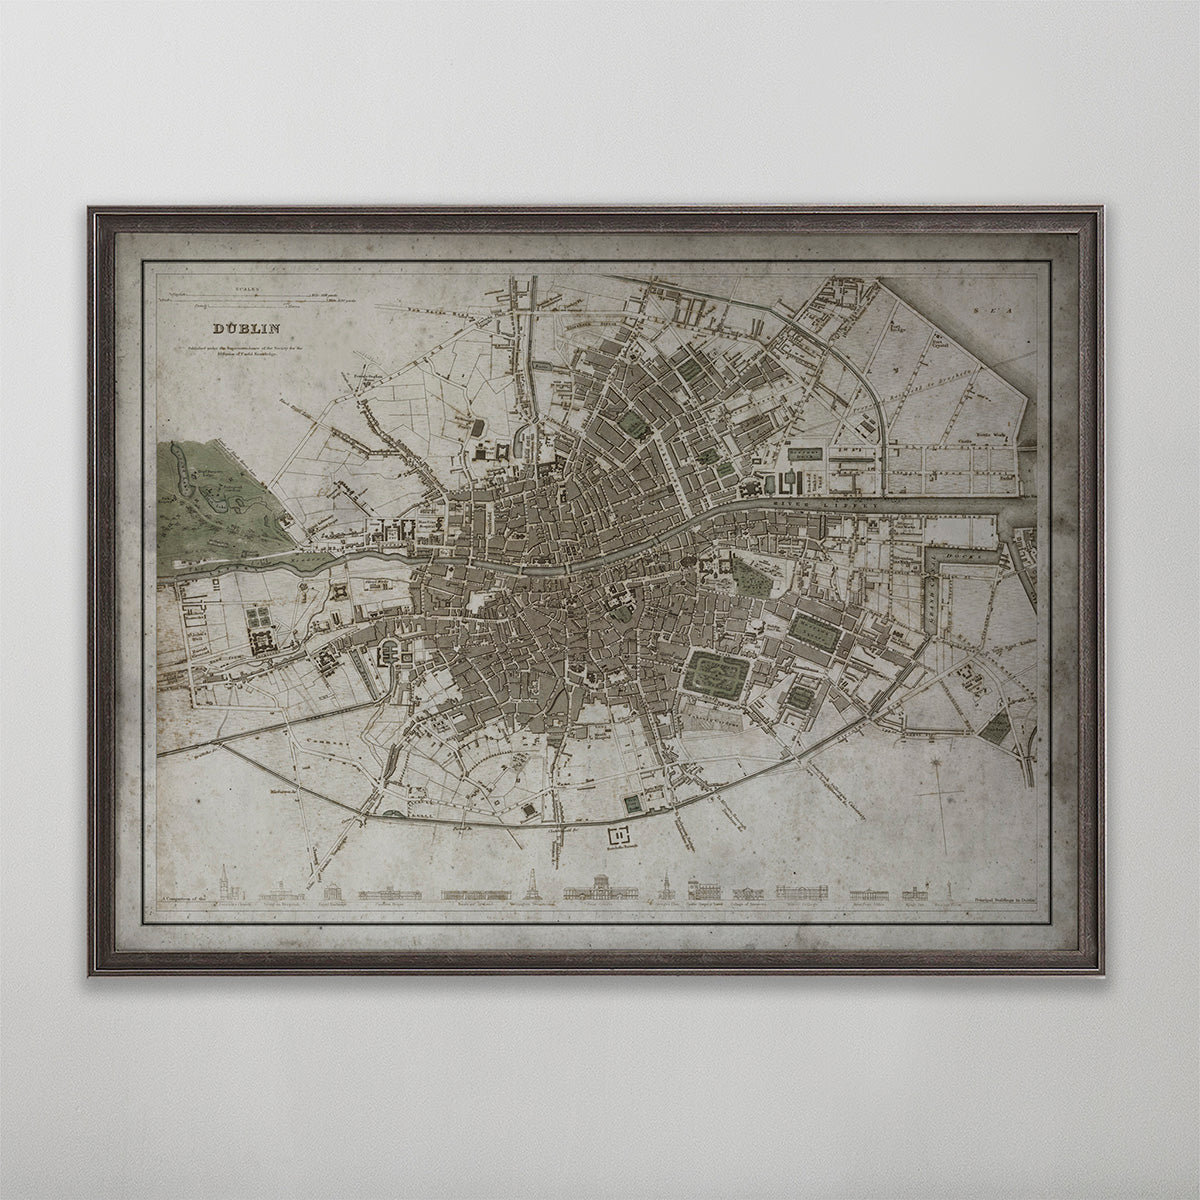 Old vintage historic map of Dublin, Ireland for wall art home decor. 